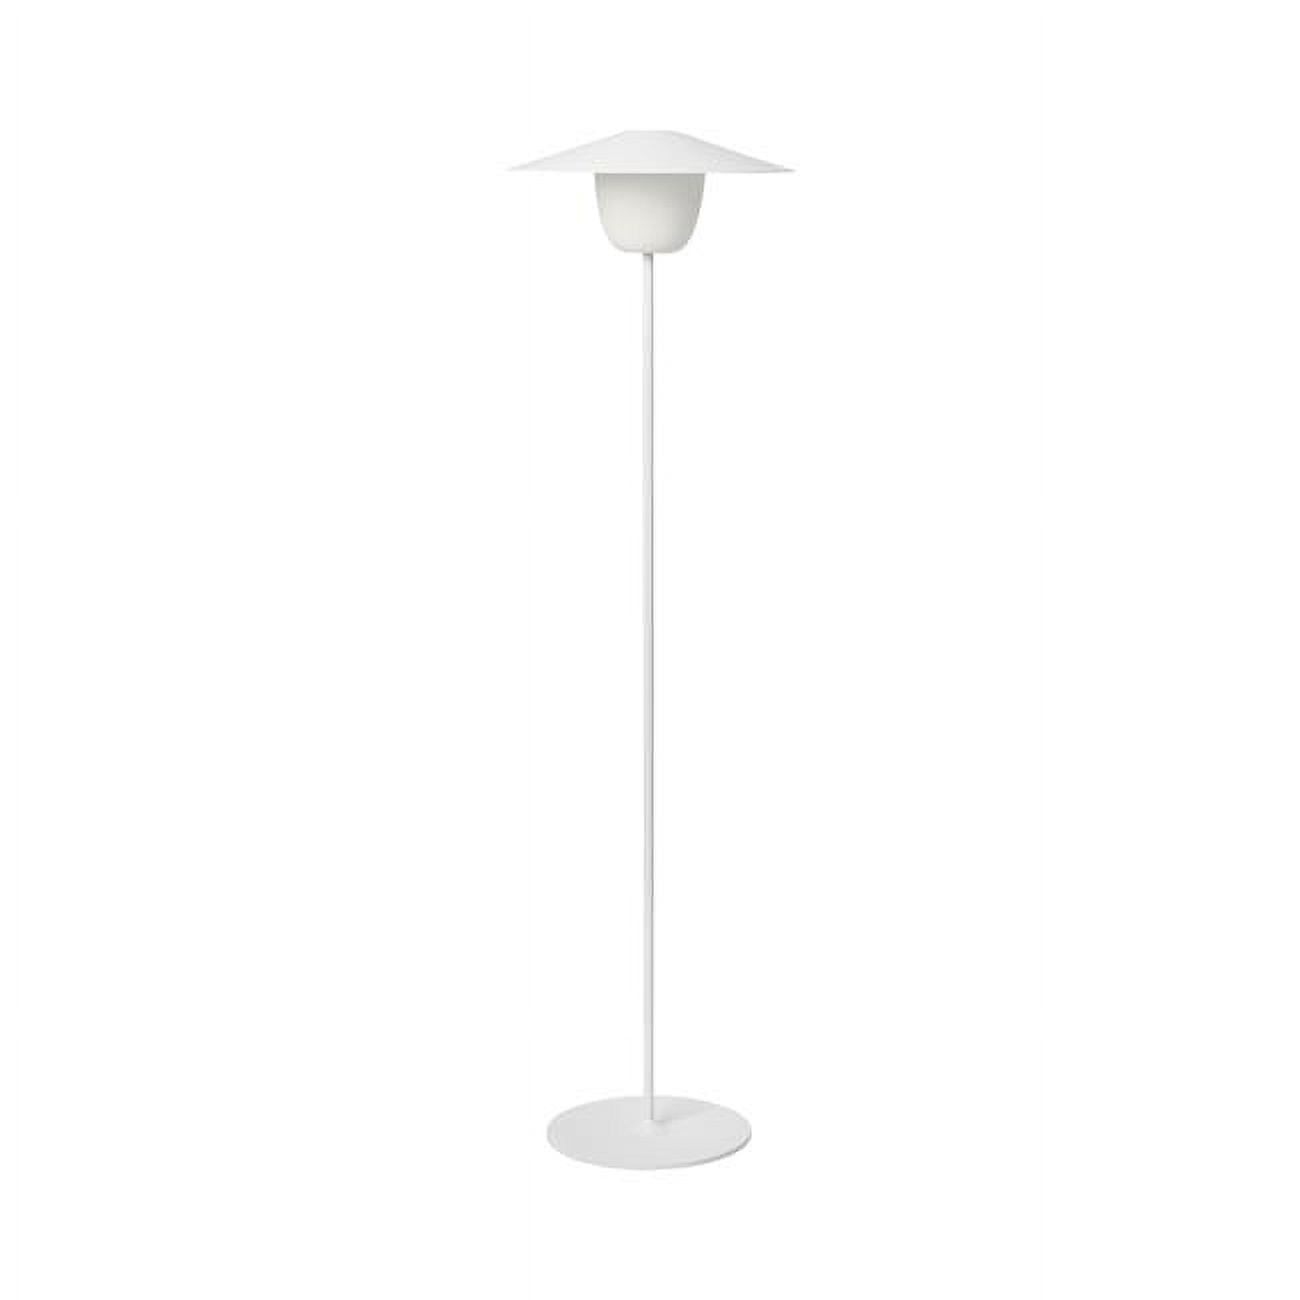 Picture of Blomus 66071 120 x 34 cm Ani Mobile LED Floor Lamp, White - Large